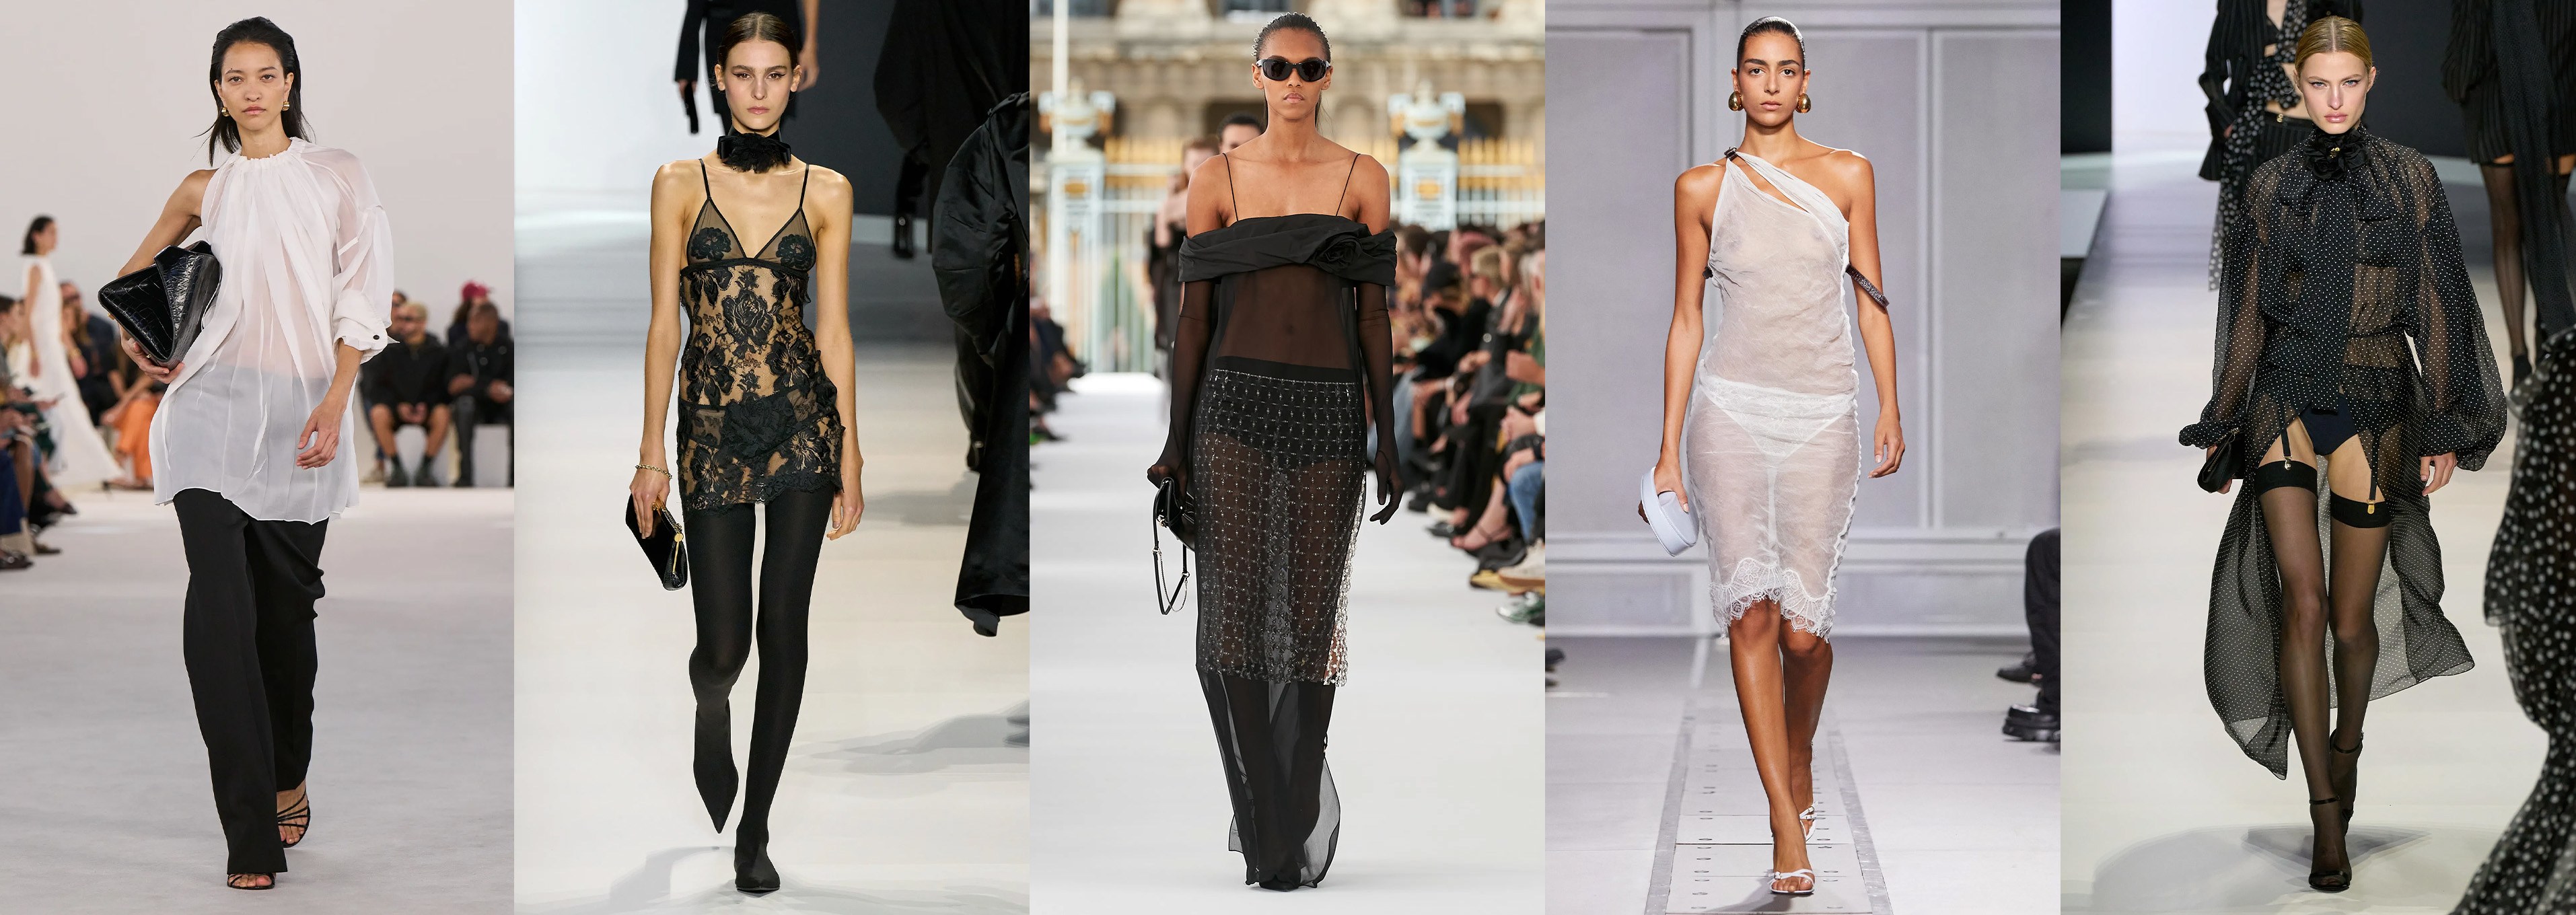 Chic In Sheer: The New Trend of See-Through Outfits